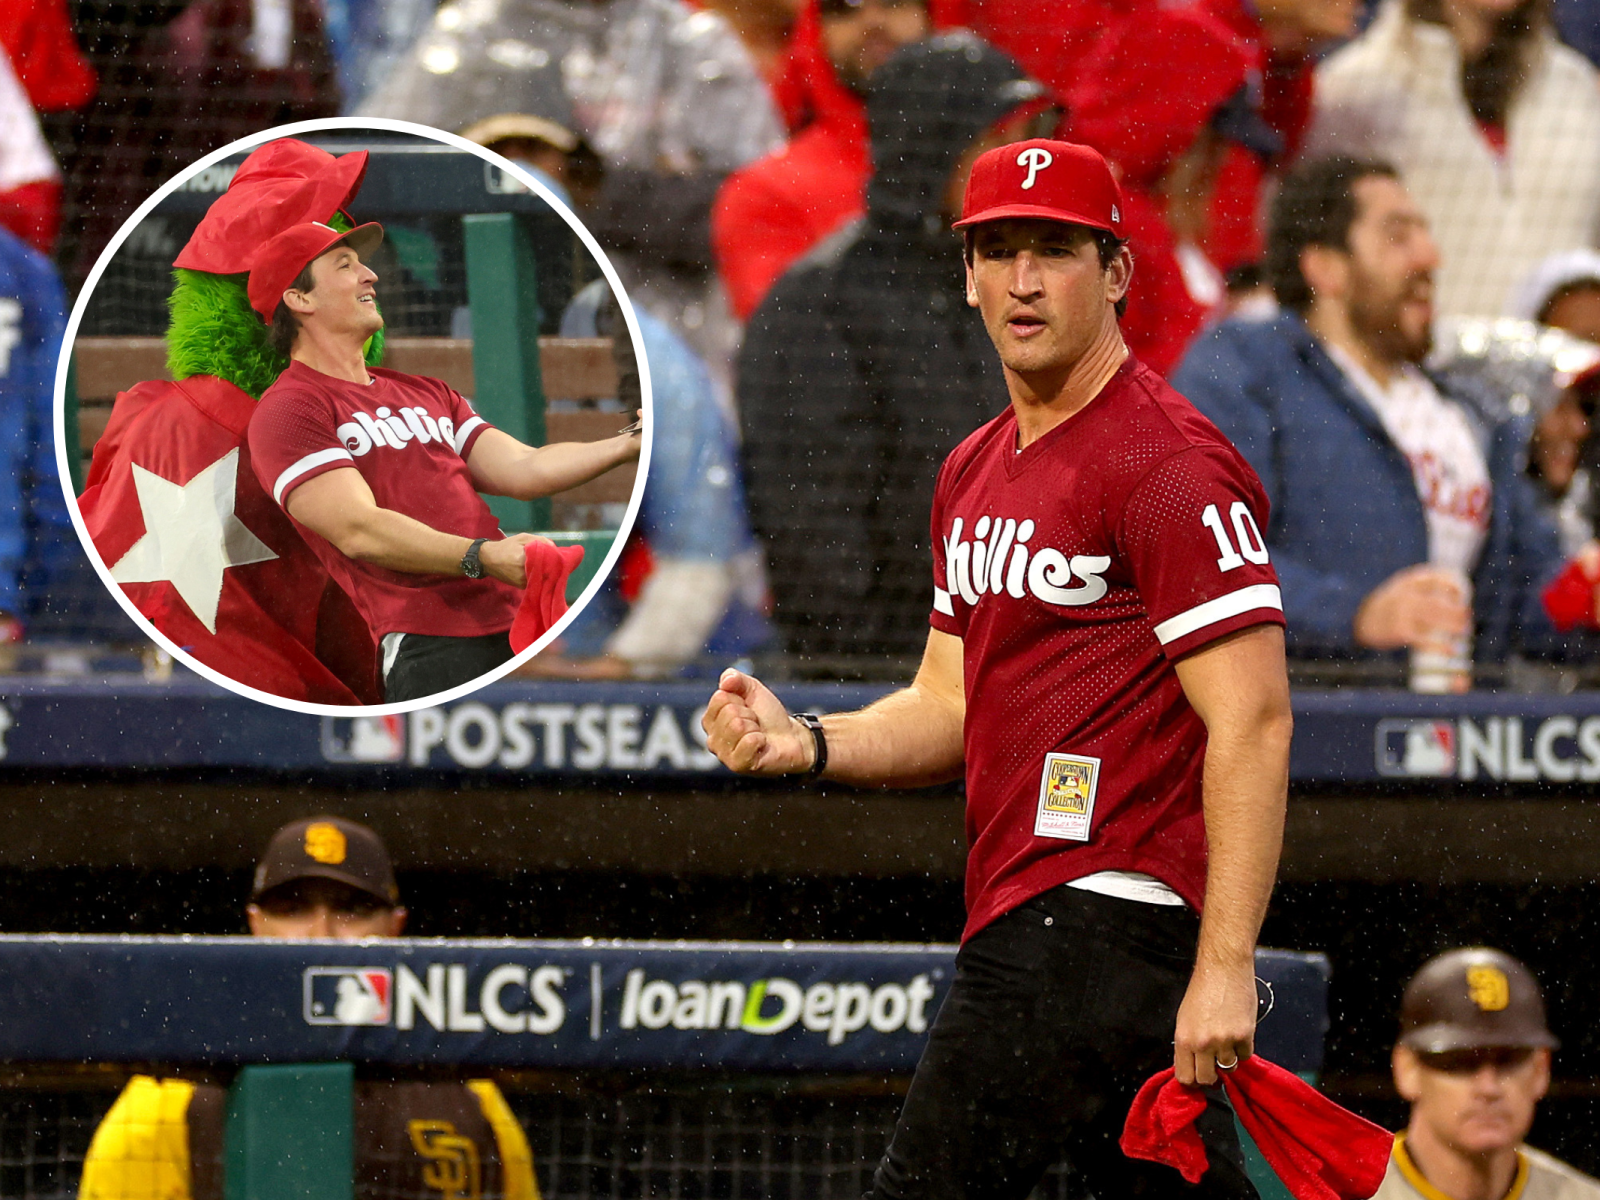 Phillies fan who went viral for dancing clears some things up